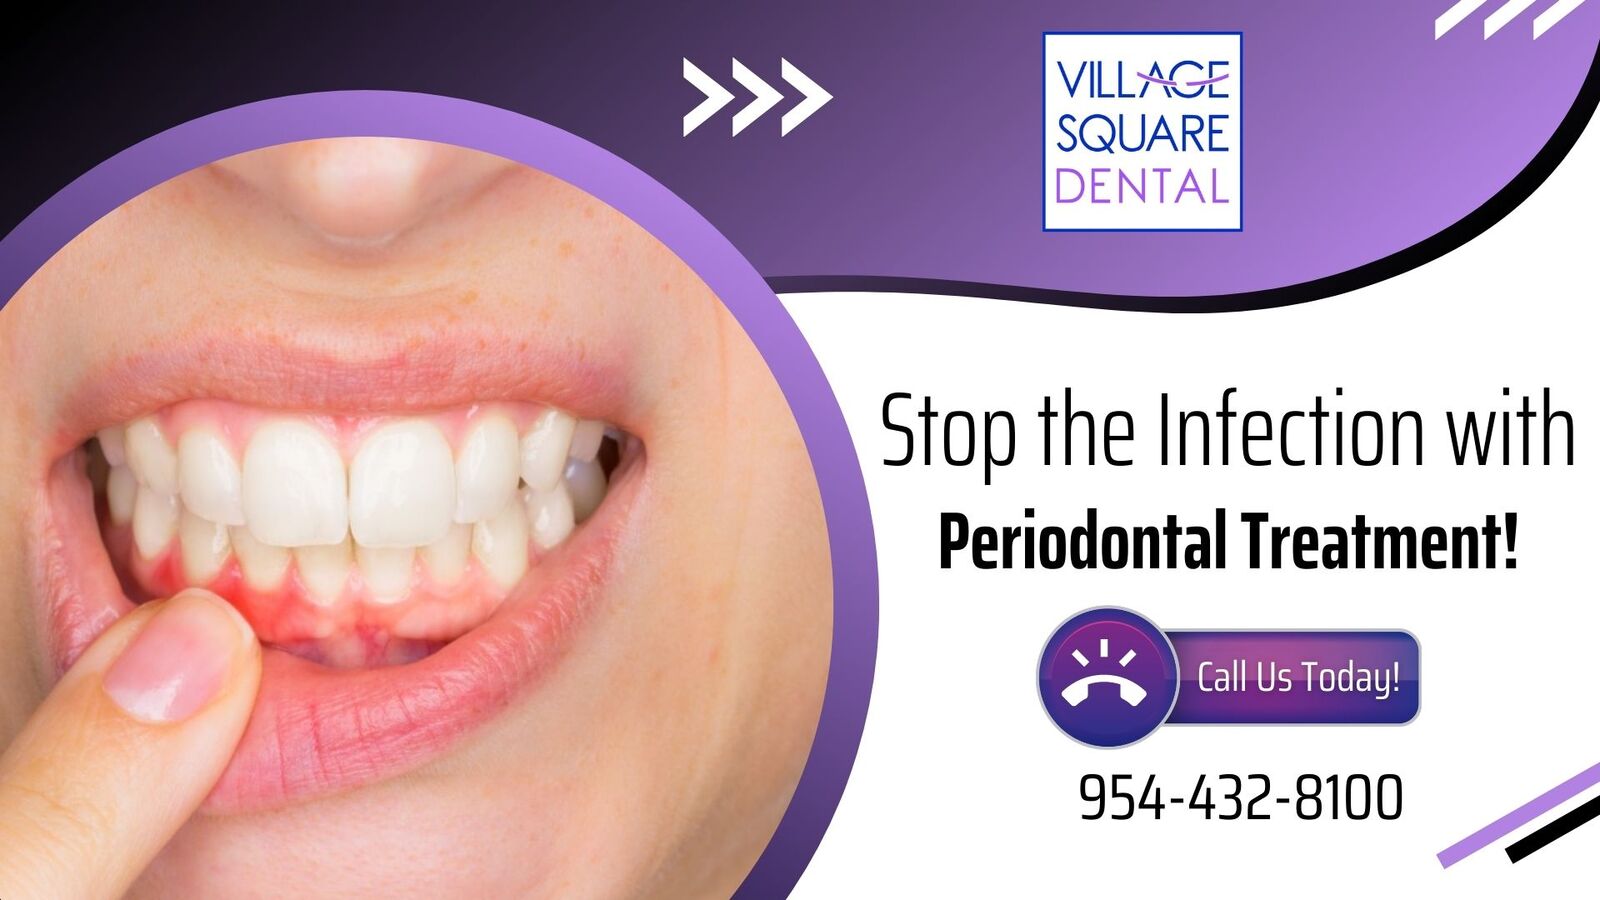 Get Comprehensive Periodontal Therapy Services